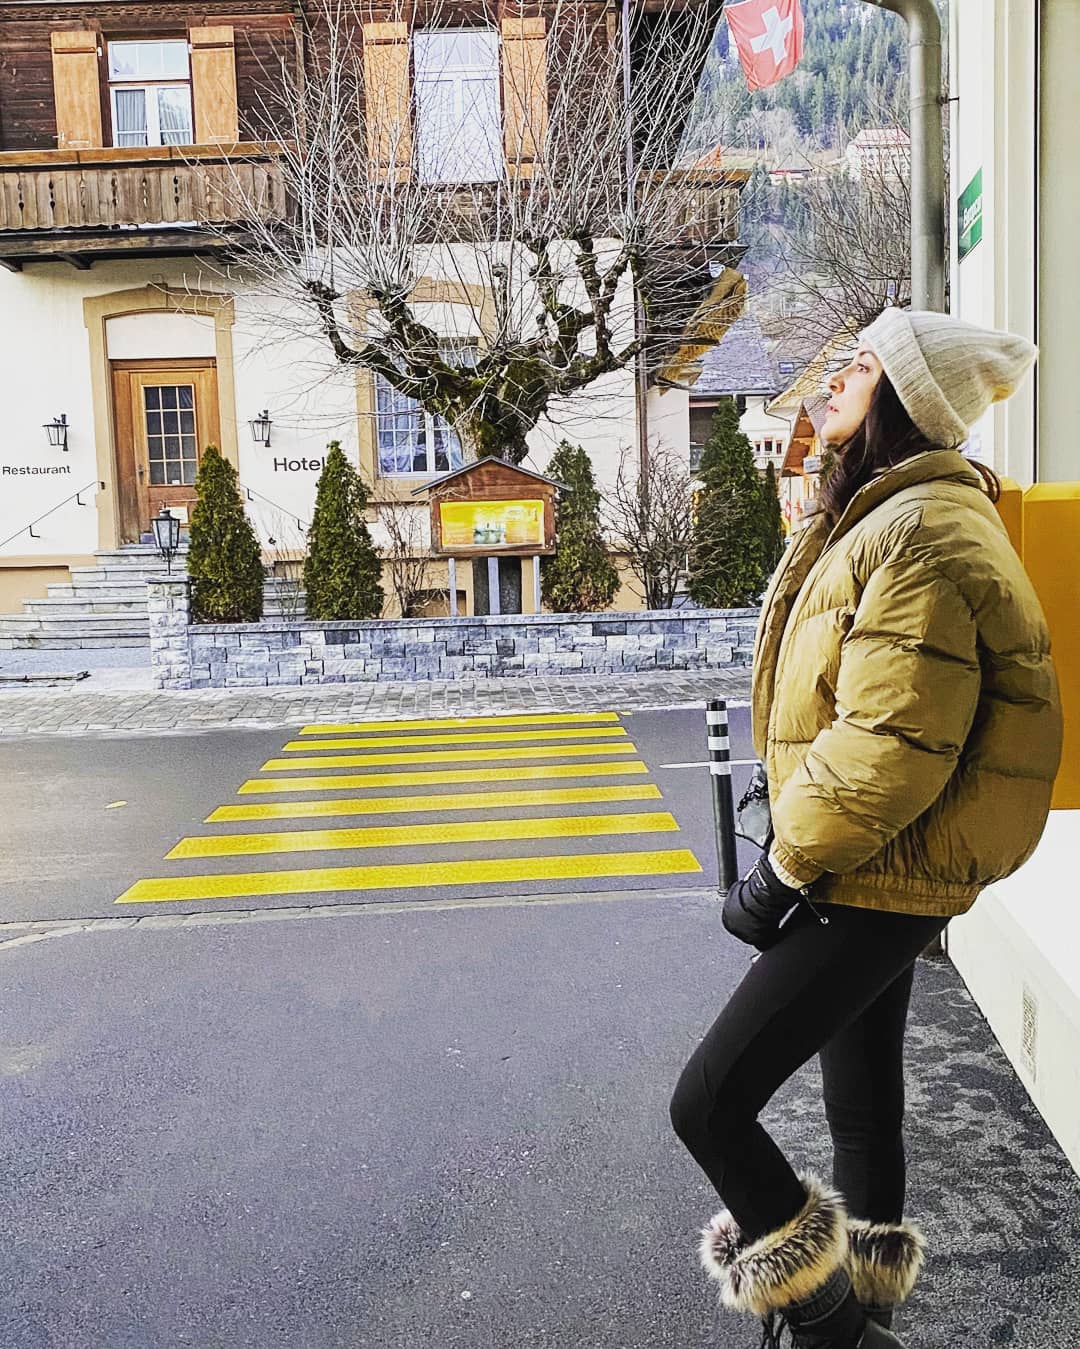  Anushka Sharma aces winter dressing in this bomber jacket and woollen cap. (Image: Instagram)